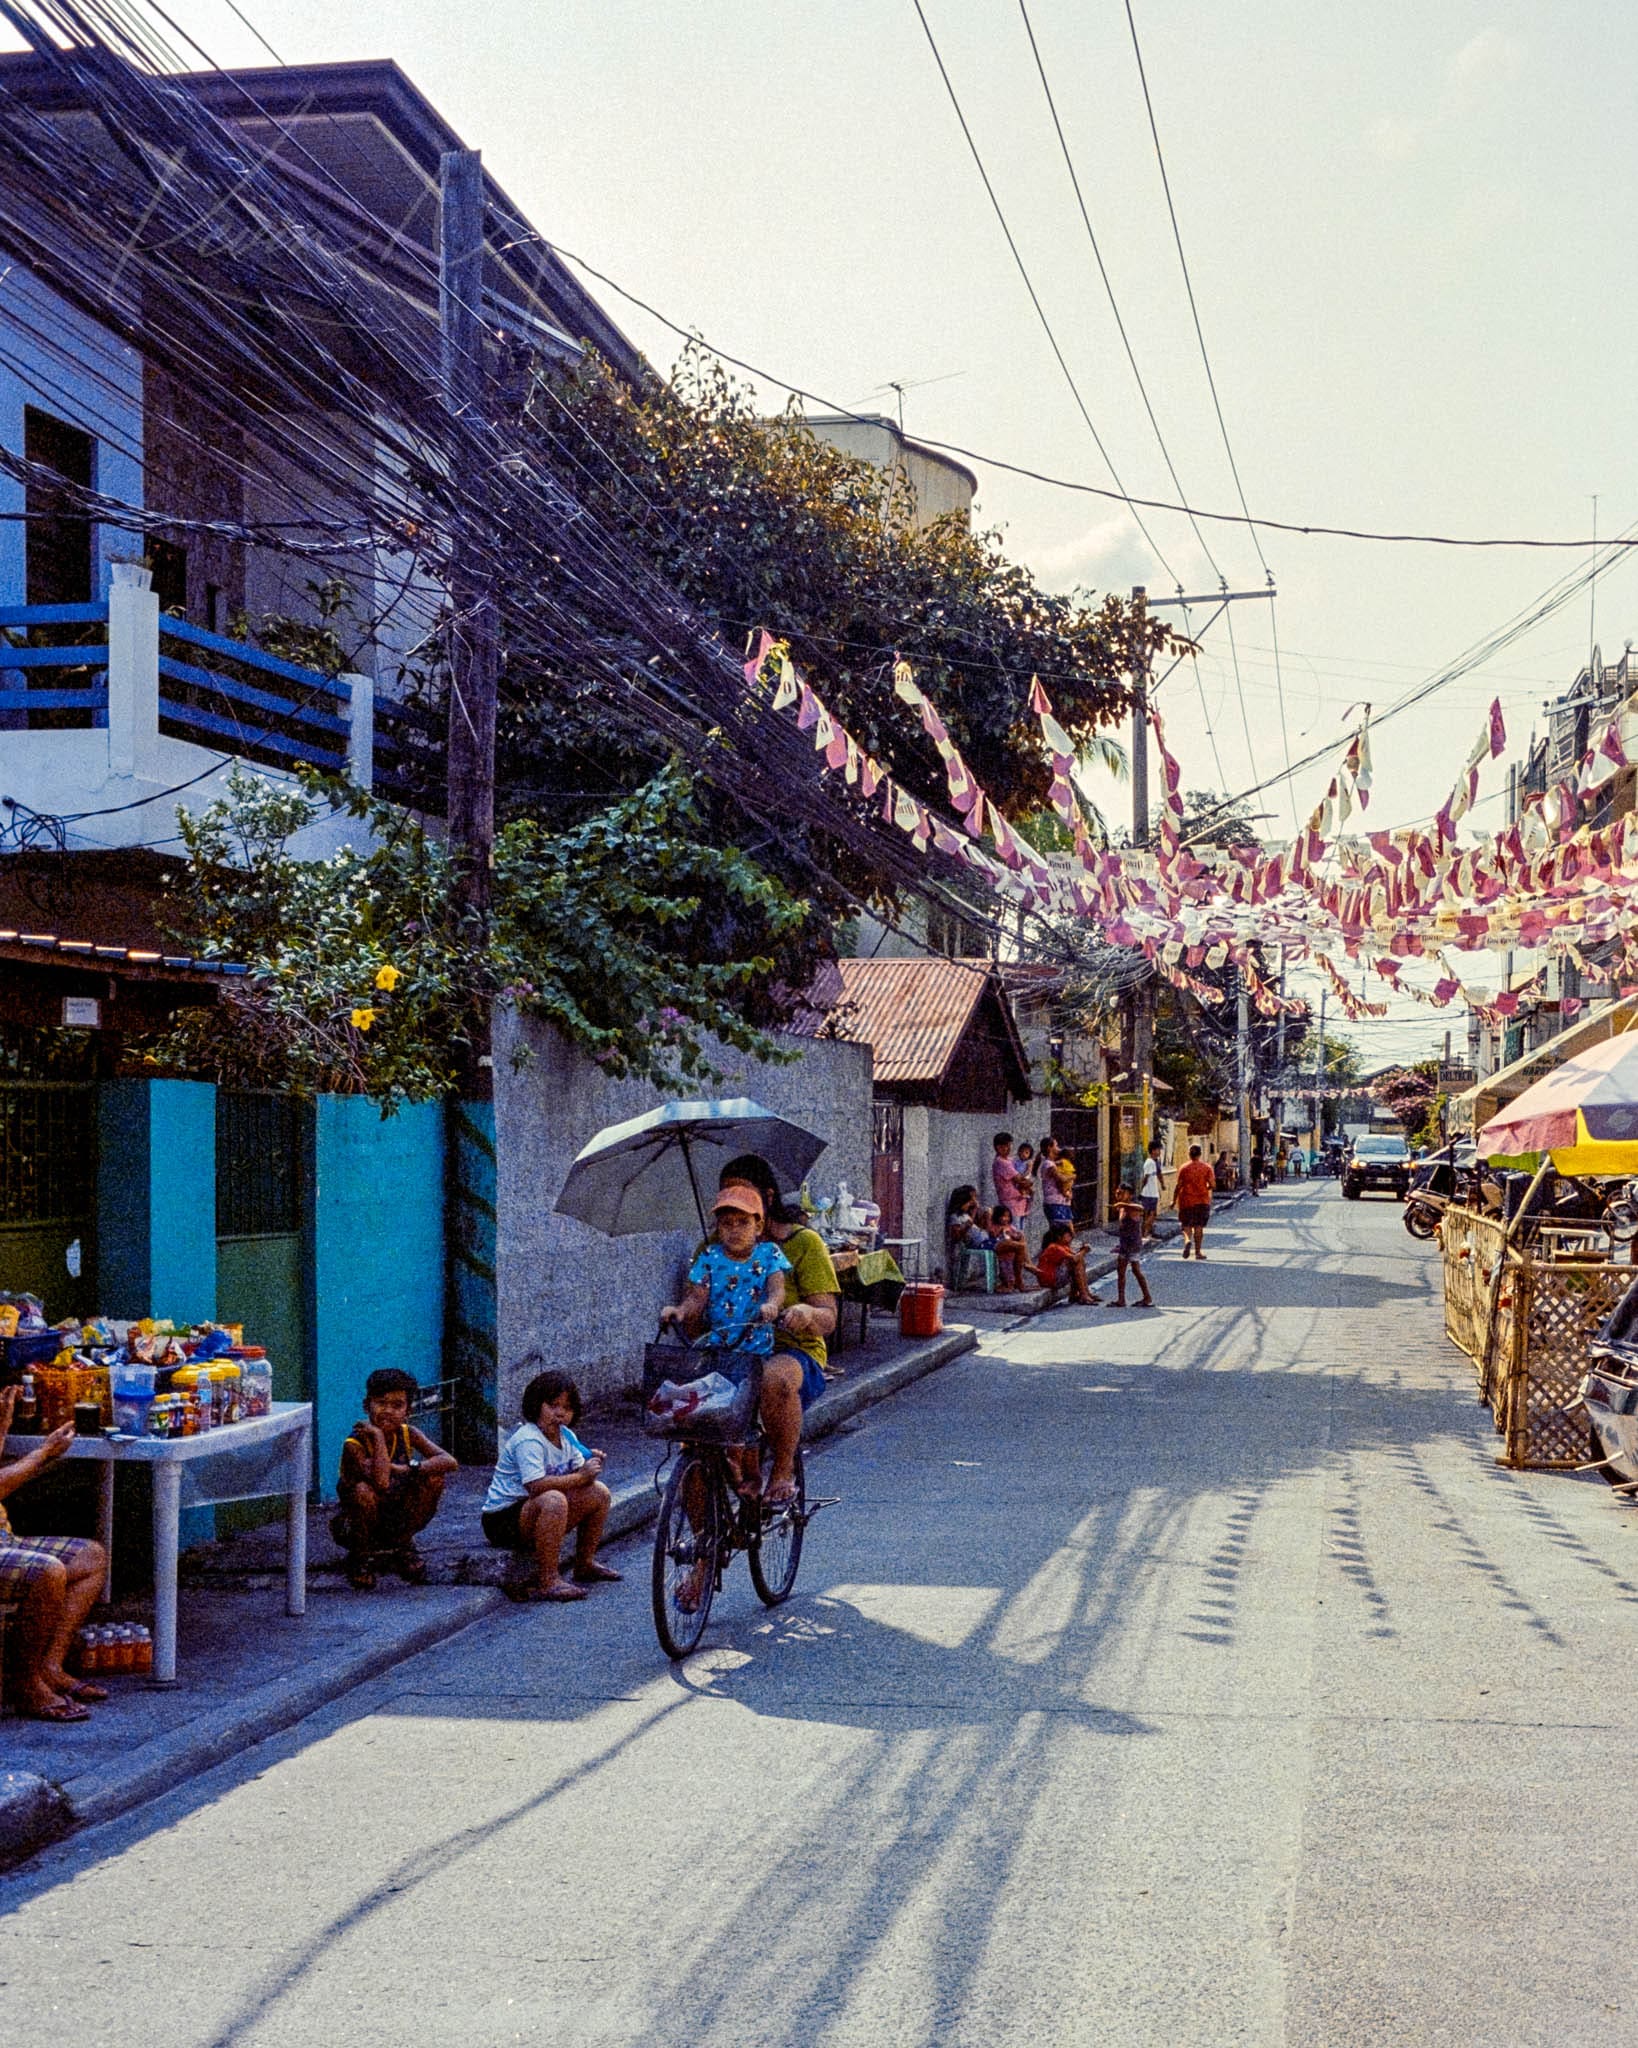 Bustling Sunny Street with Cyclist, Pedestrians and Local Shops in Warm Philippines